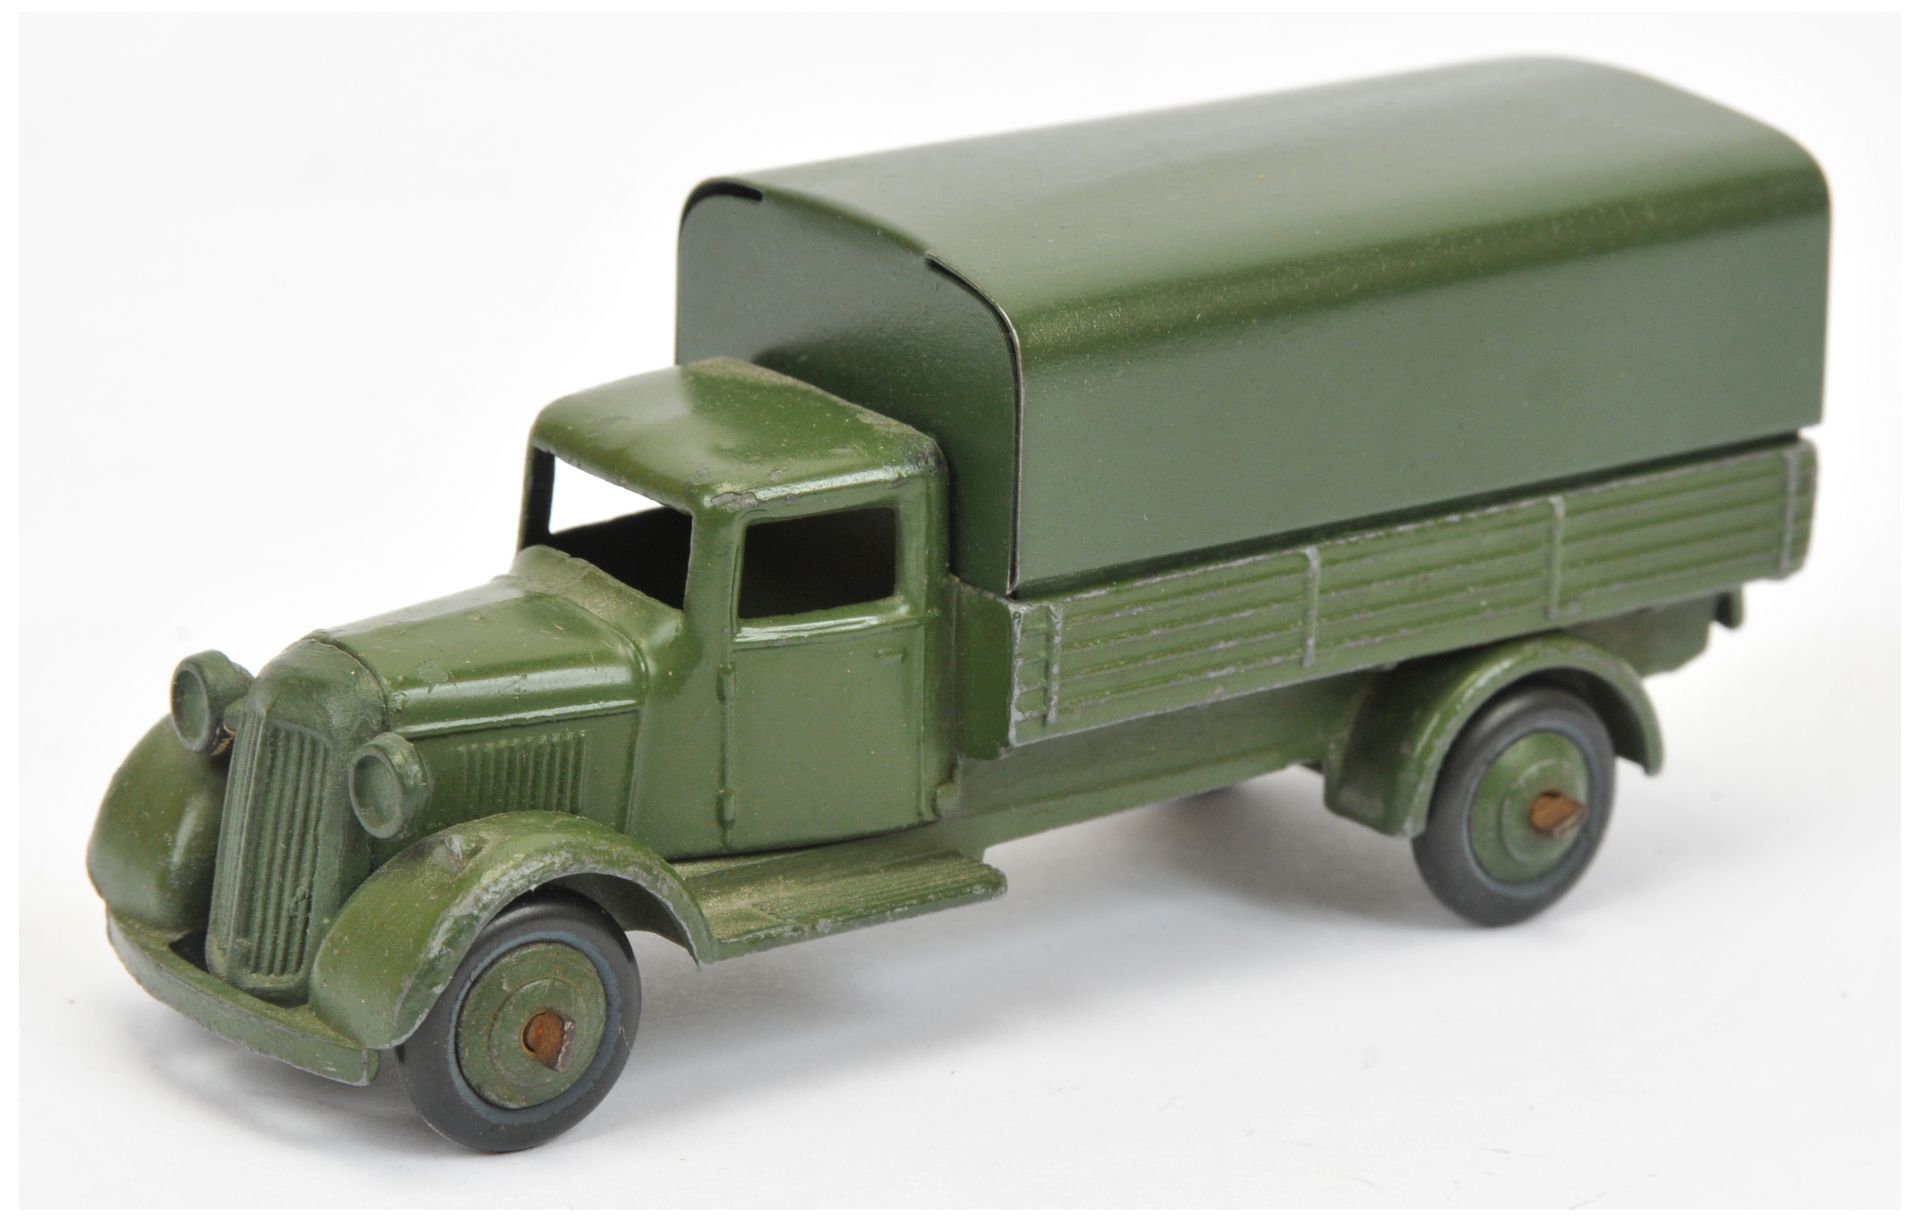 Dinky 25B South African Covered wagon - finished in military green